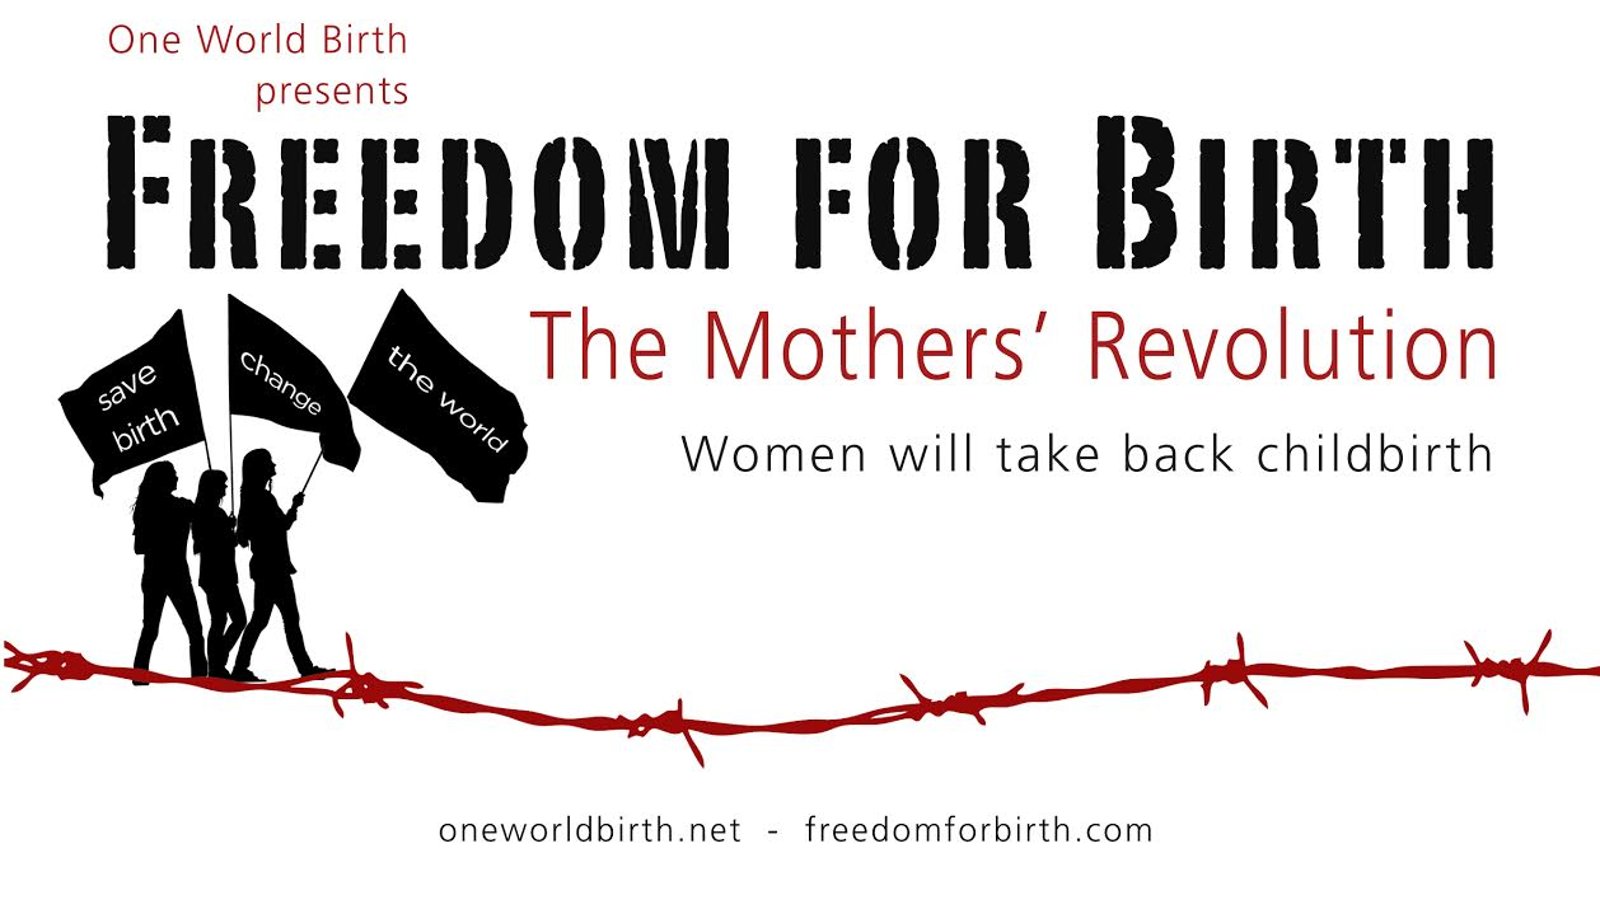 Freedom for Birth - Women's Rights in Childbirth